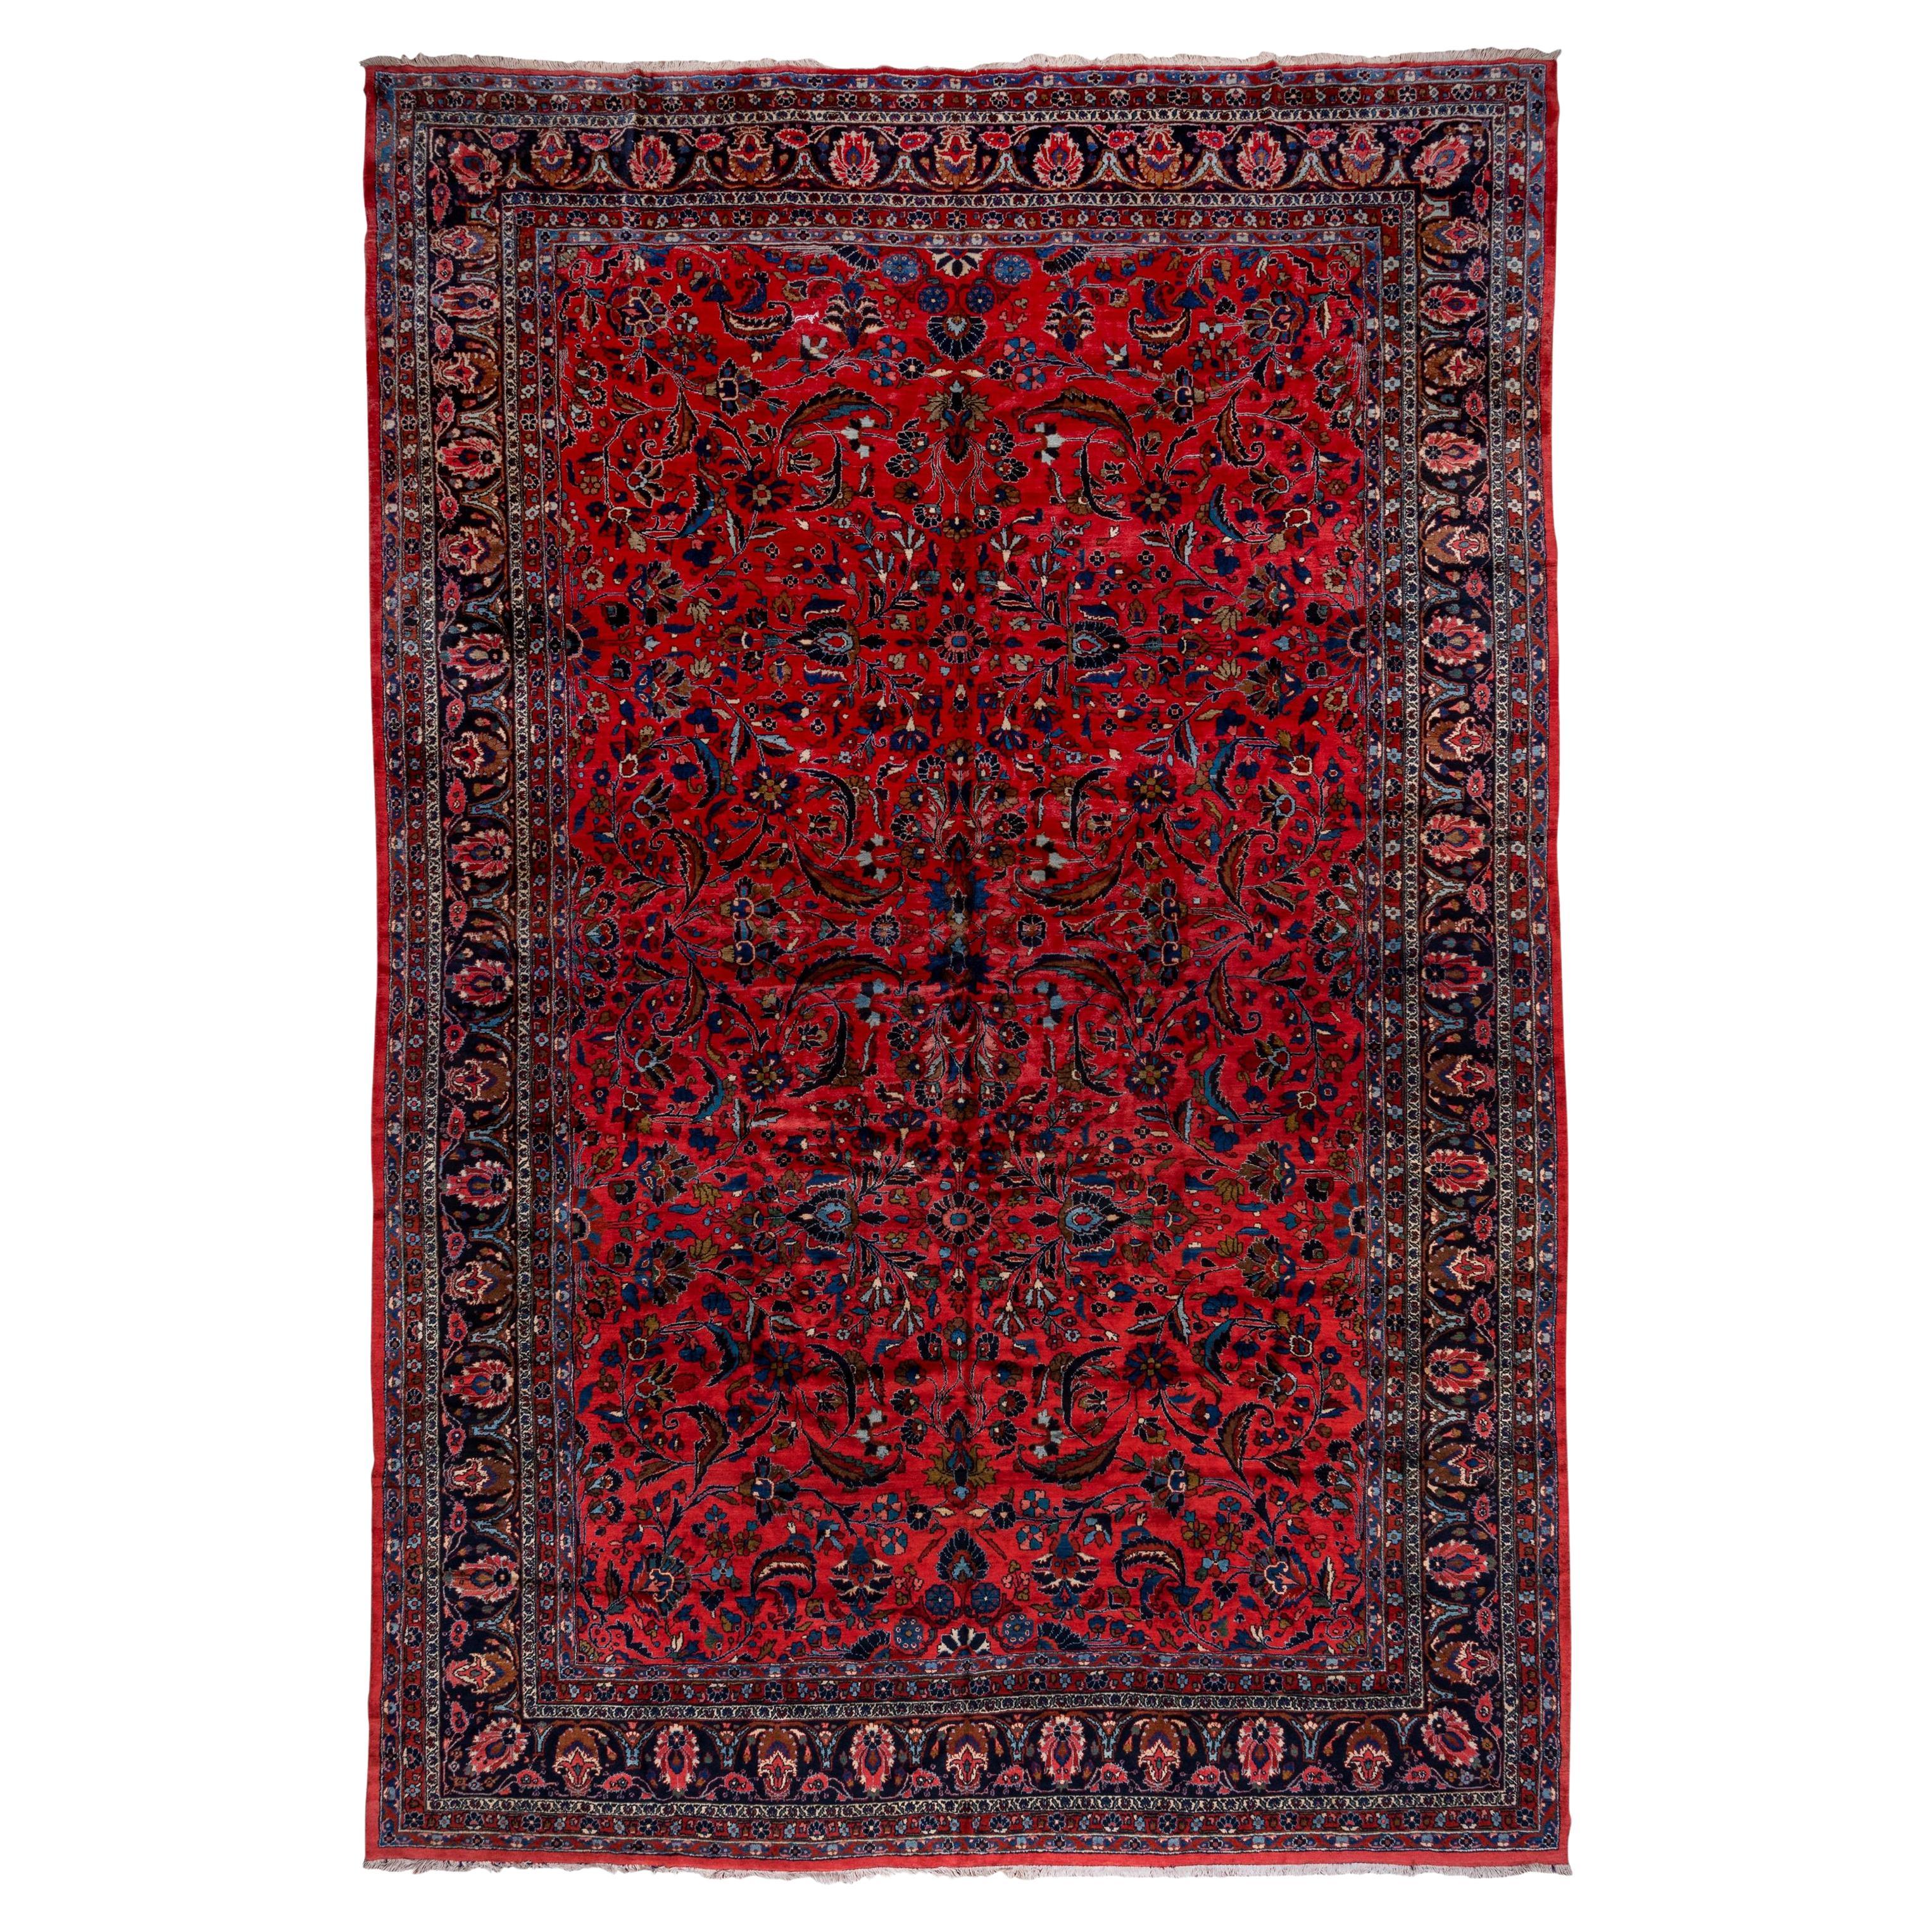 Palace Sized Antique Persian Red Lilian Carpet, circa 1920s